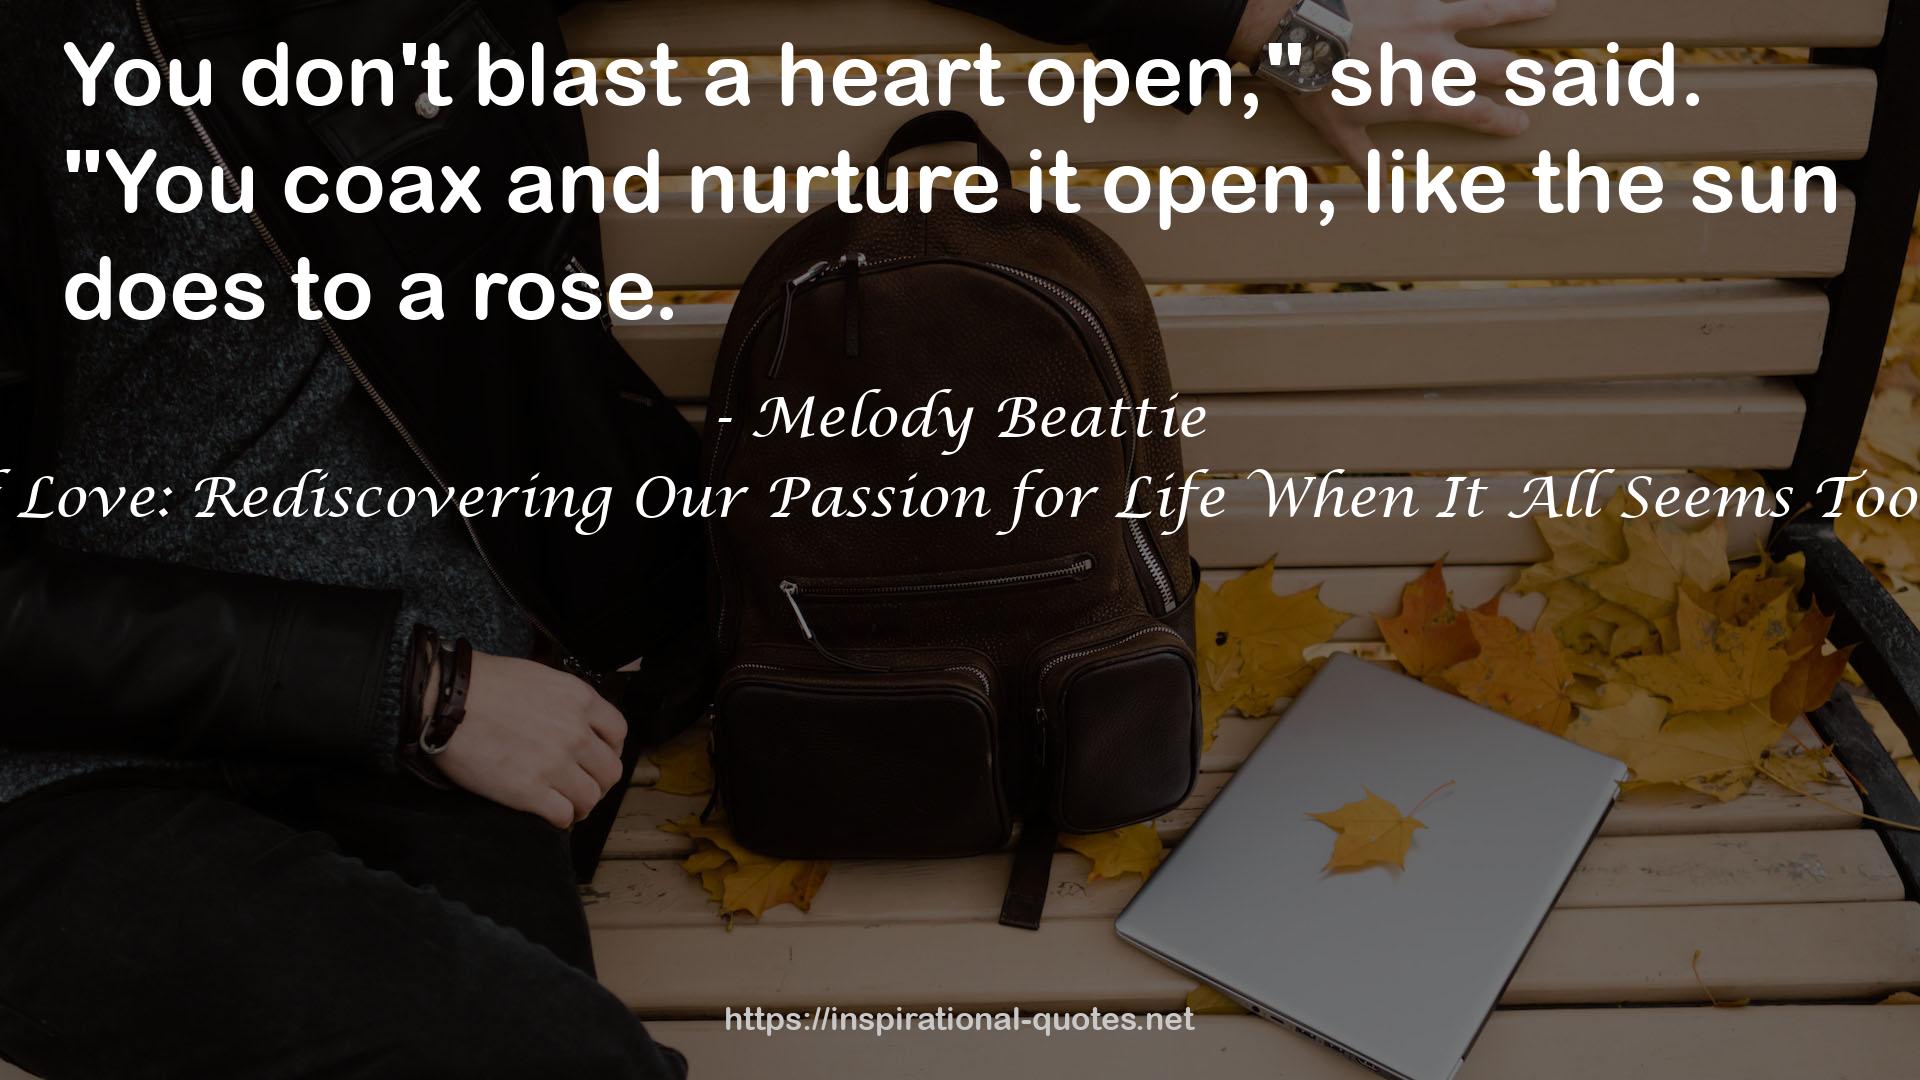 The Lessons of Love: Rediscovering Our Passion for Life When It All Seems Too Hard to Take QUOTES